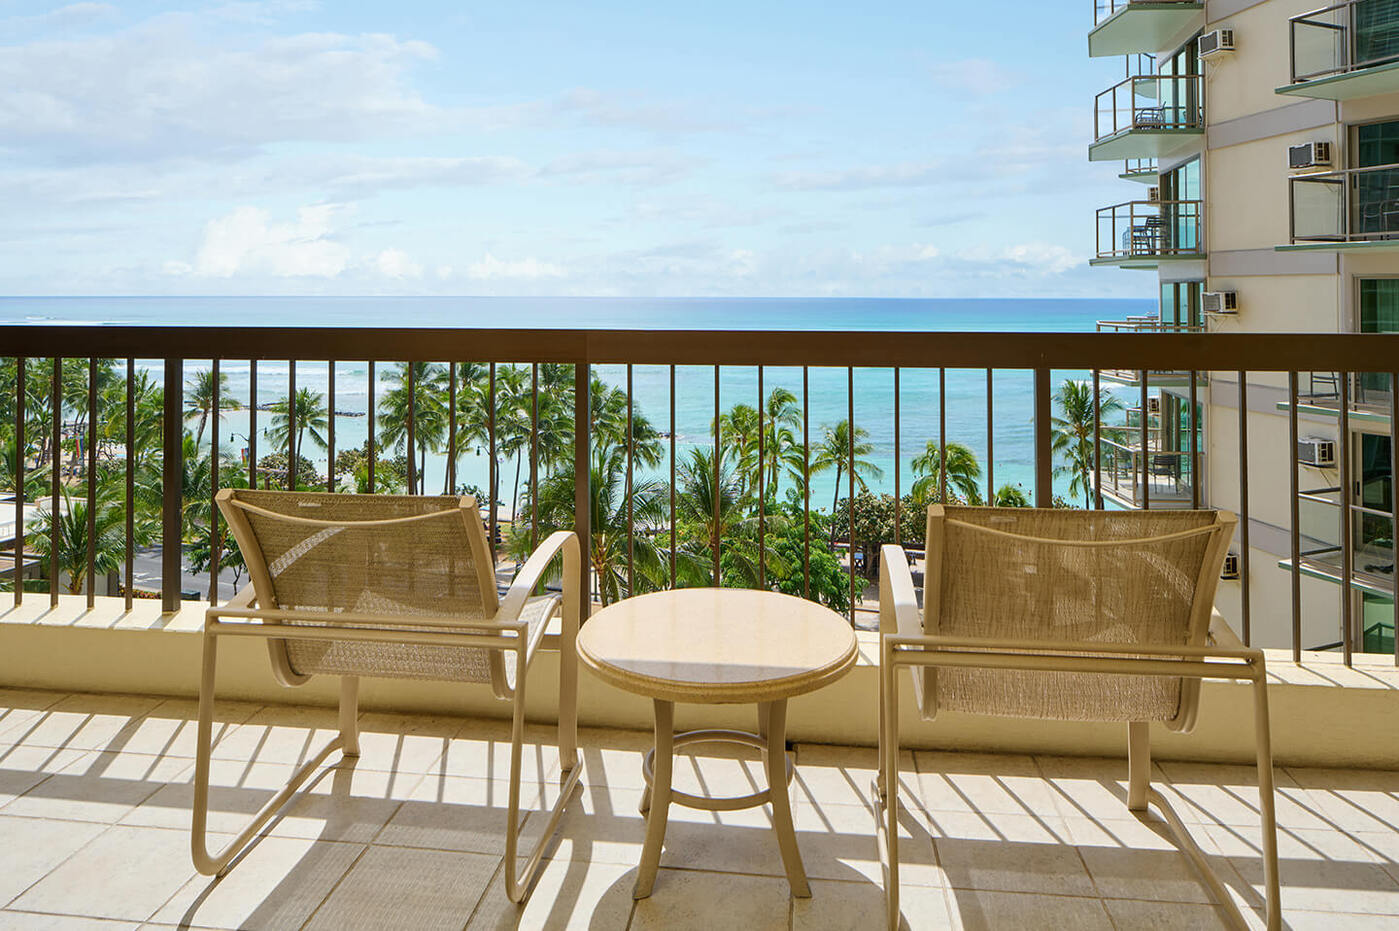 View of ocean from balcony with table and chairs